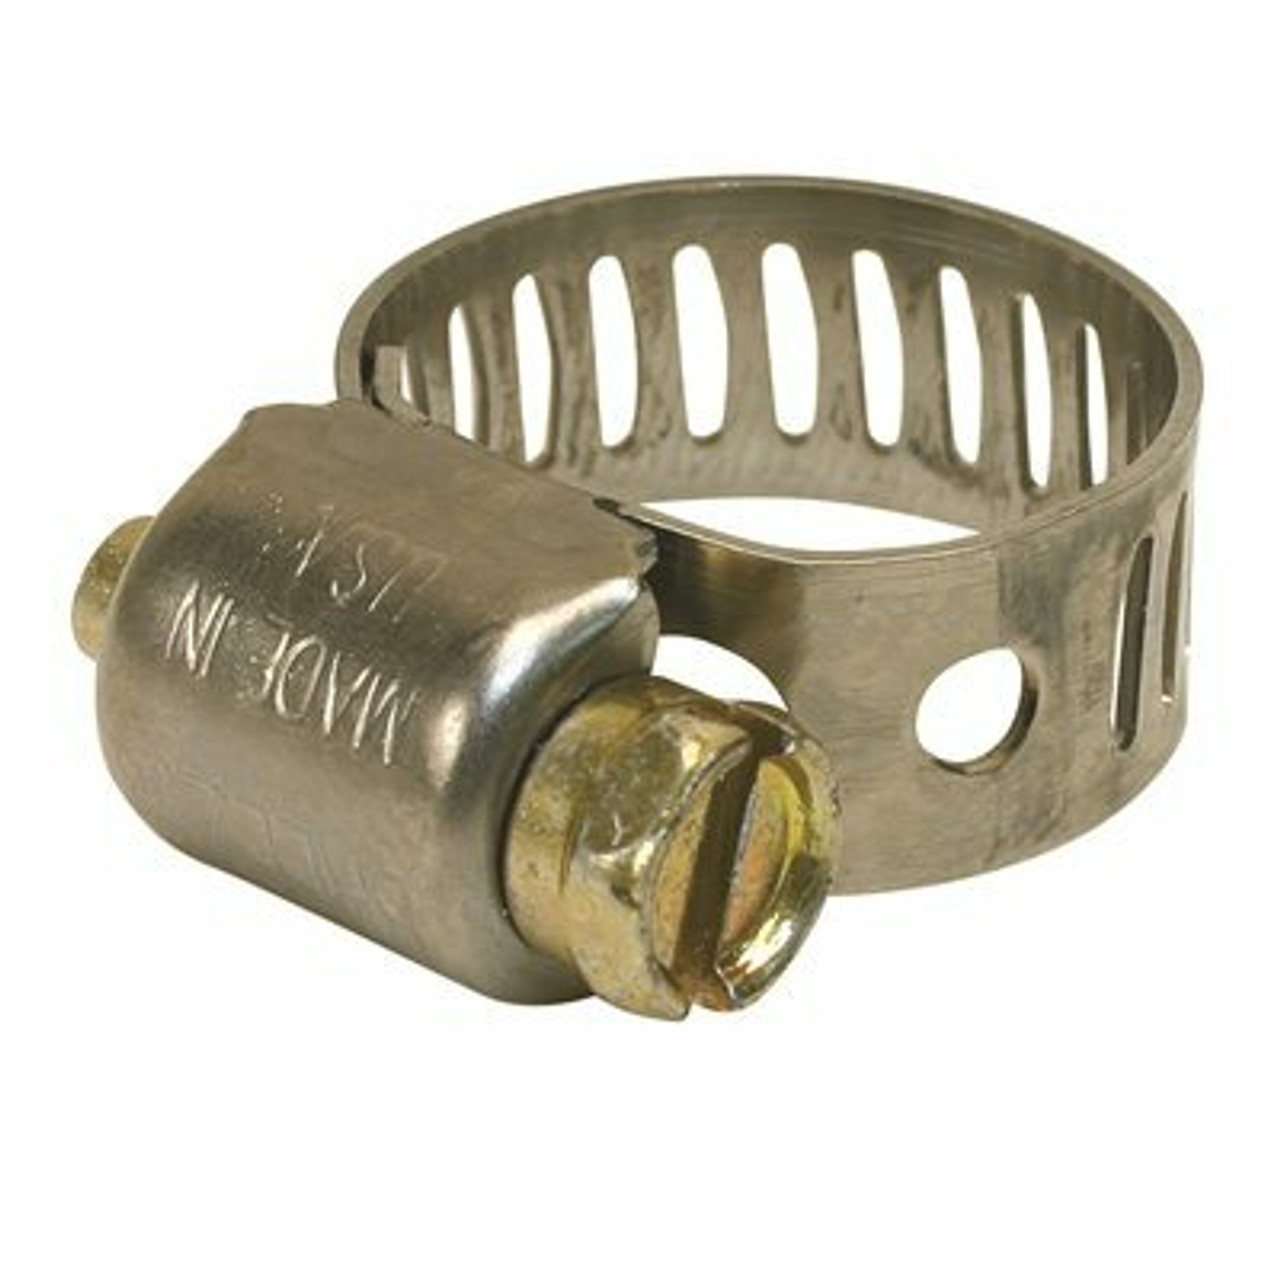 Breeze Clamp Breeze Hose Clamp, 410 Stainless Steel, 3-5/16 In. To 4-1/4 In., Pack Of 10